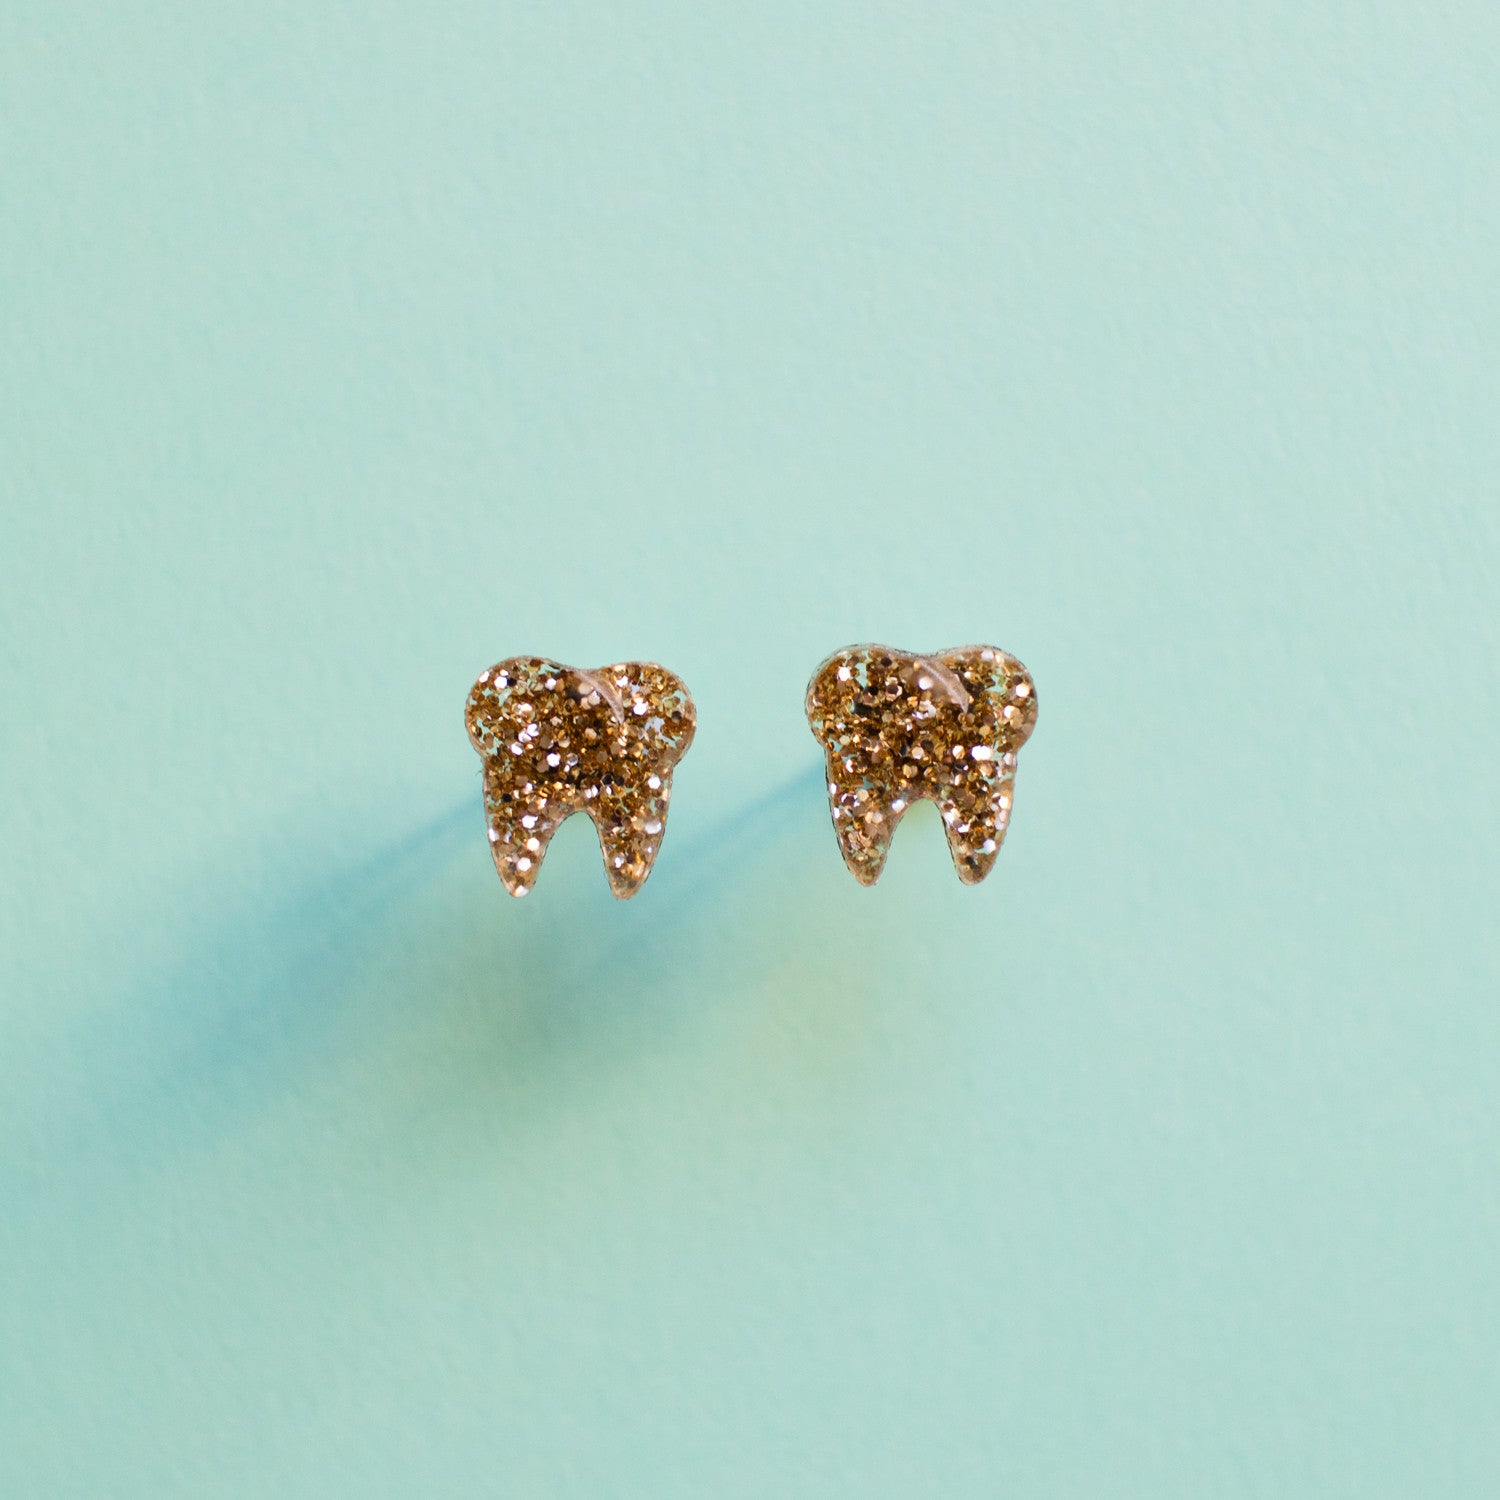 Gold Tooth Earrings - Finest Imaginary